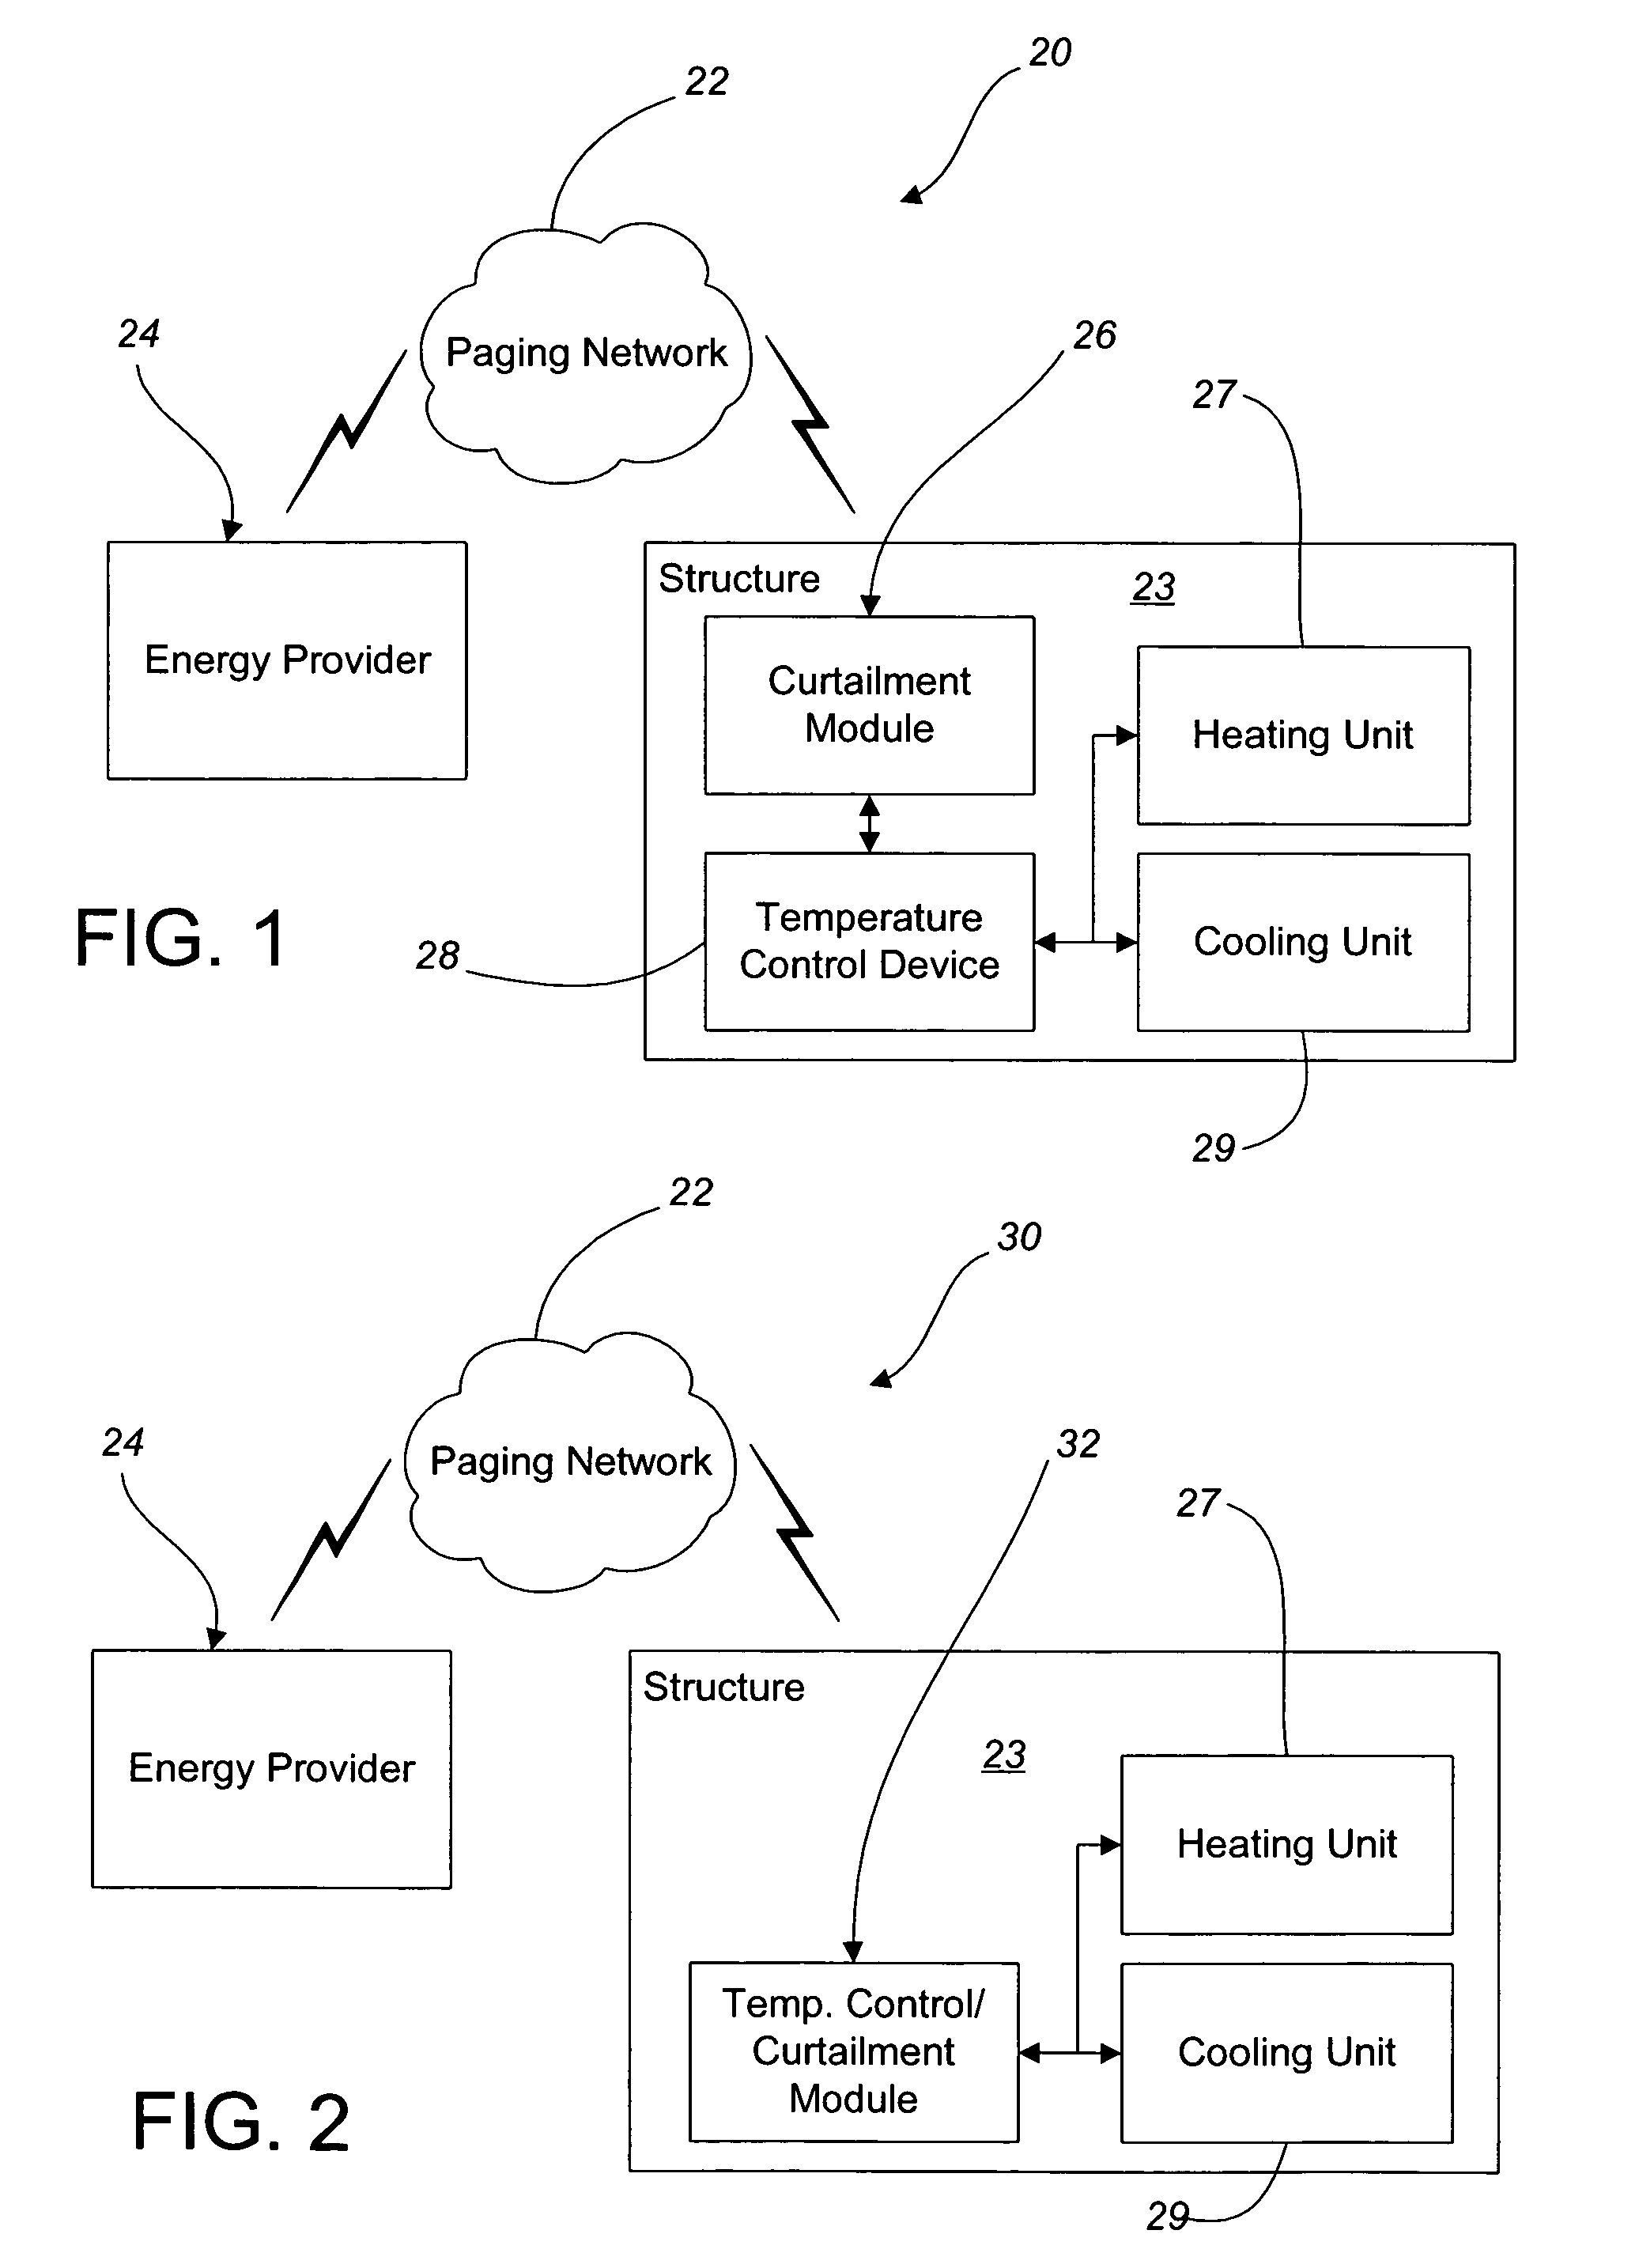 Tone generating electronic device with paging module for verification of energy curtailment